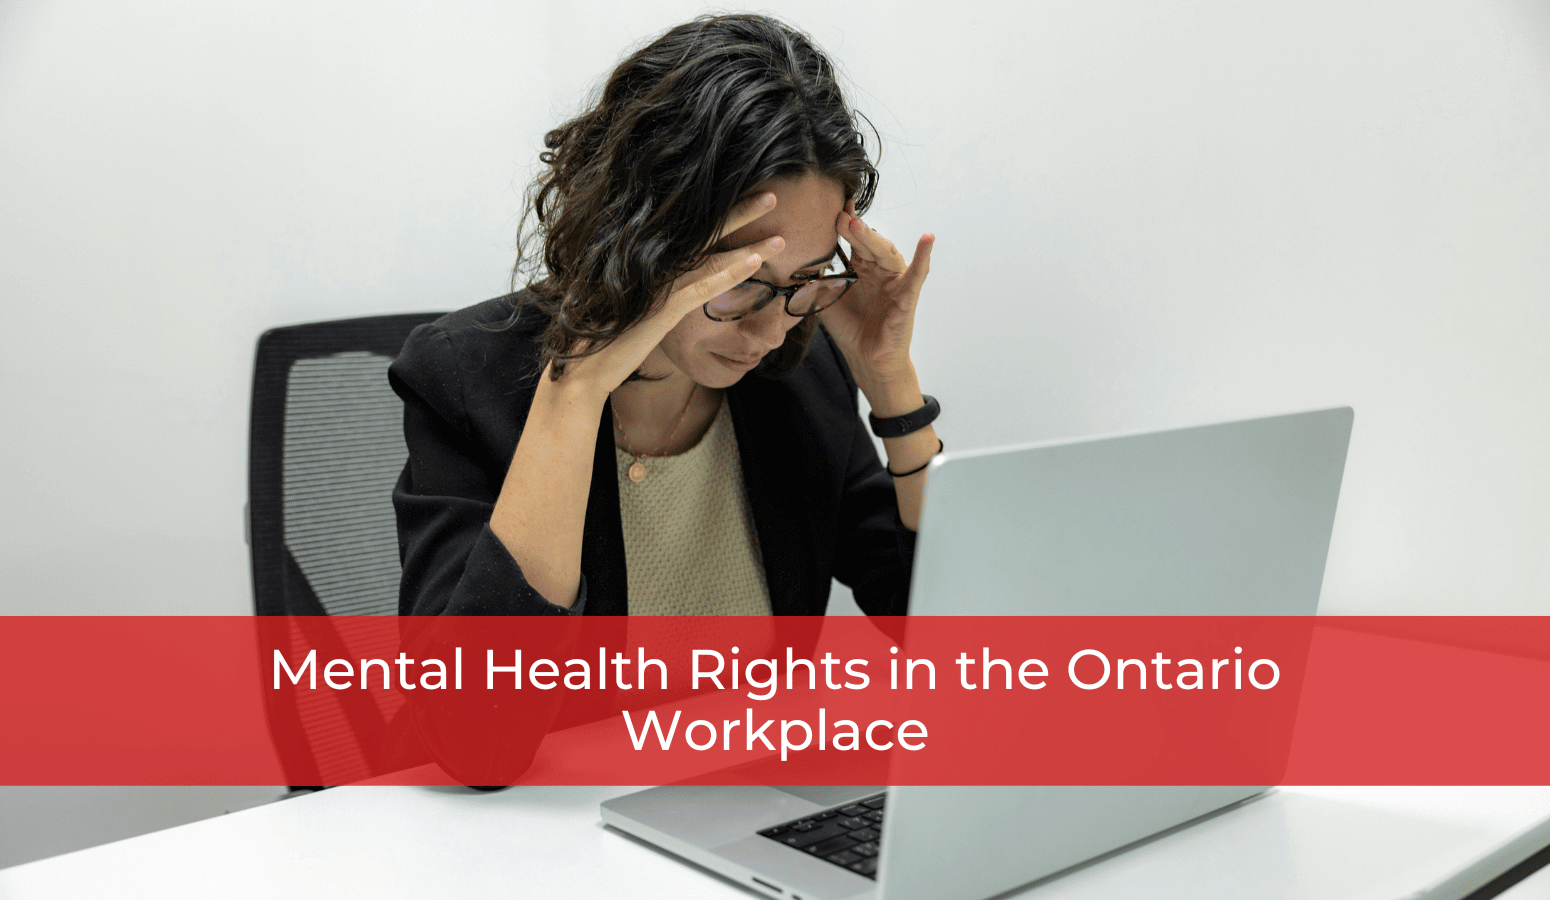 Featured image for “Mental Health Rights in the Ontario Workplace”